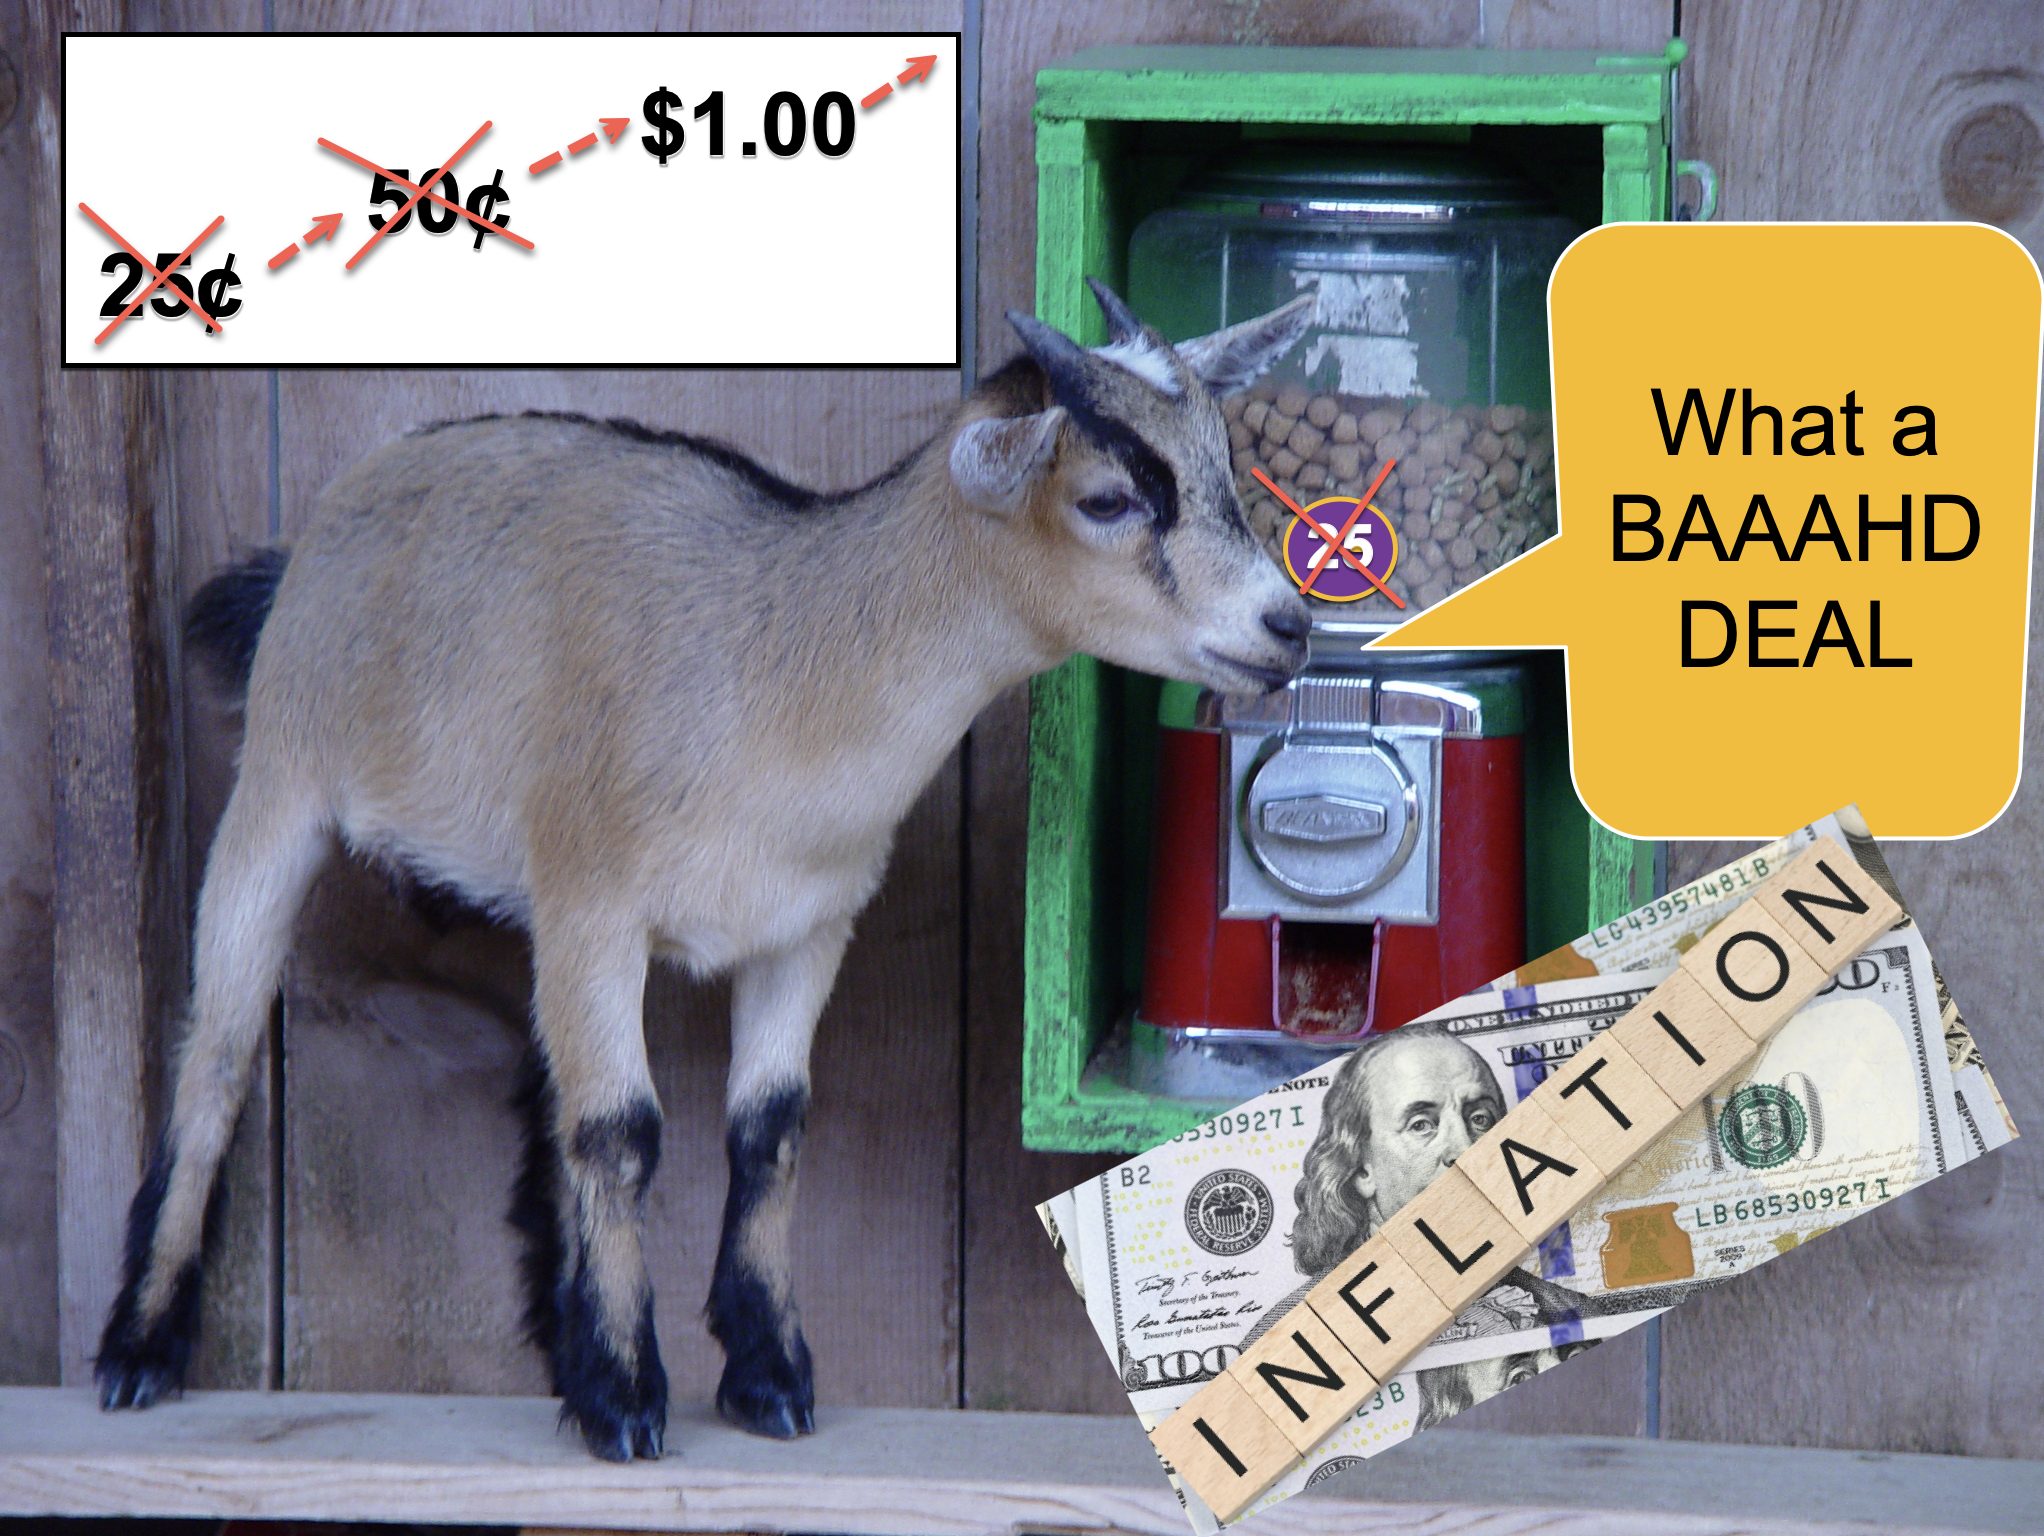 BAAAHD Deal image of a goat at a food vending machine with inflation